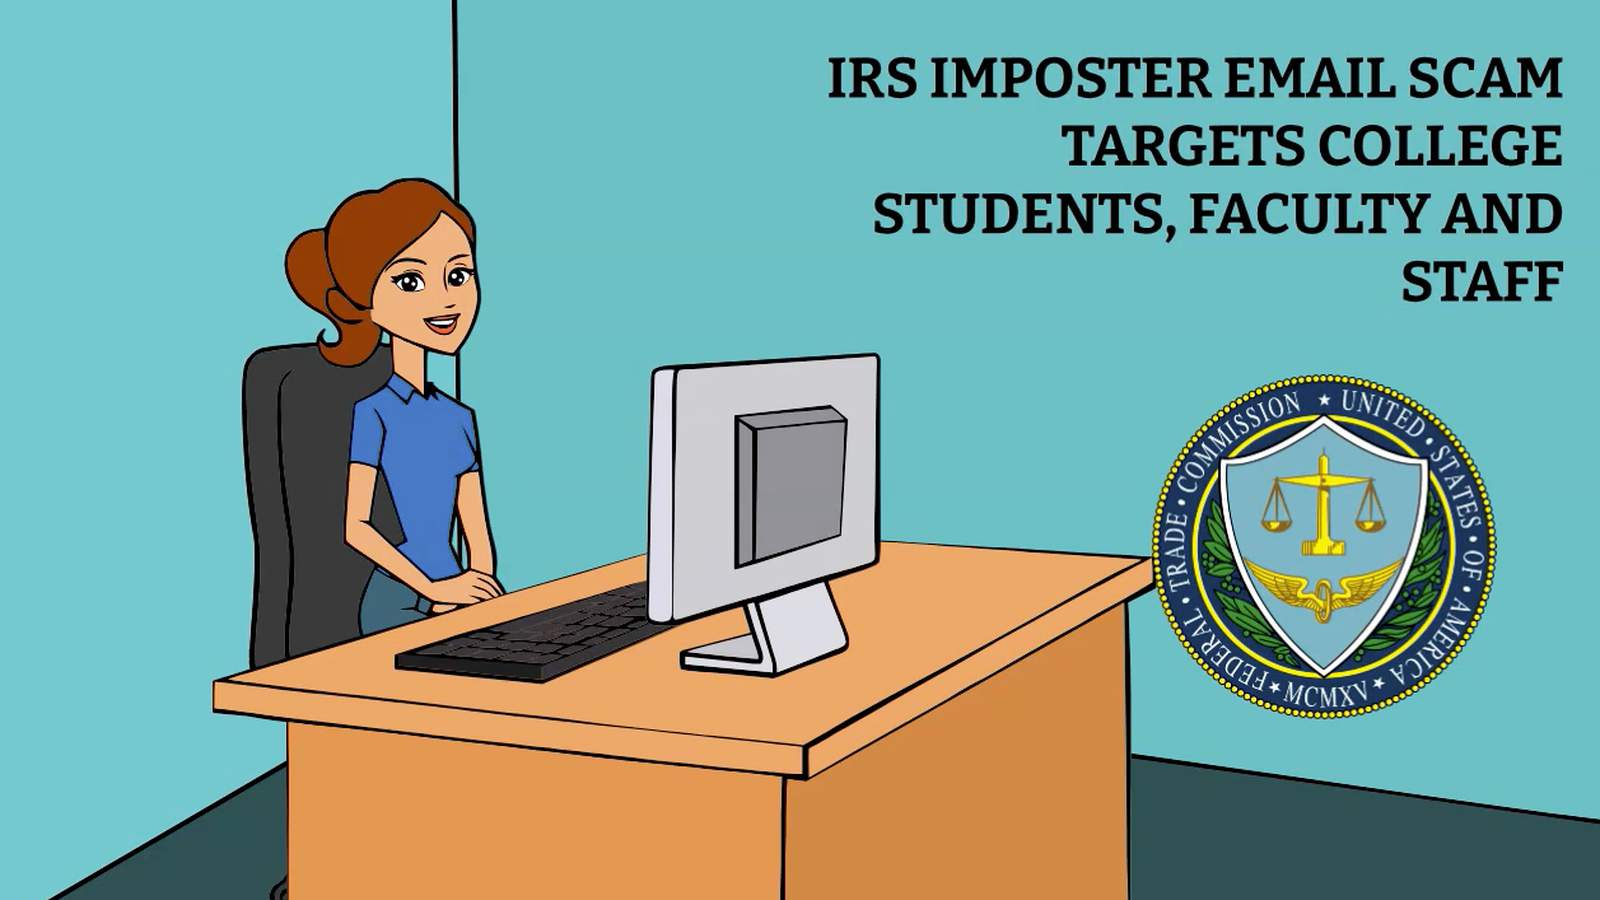 New IRS imposter scam targets college students, staff members, FTC warns